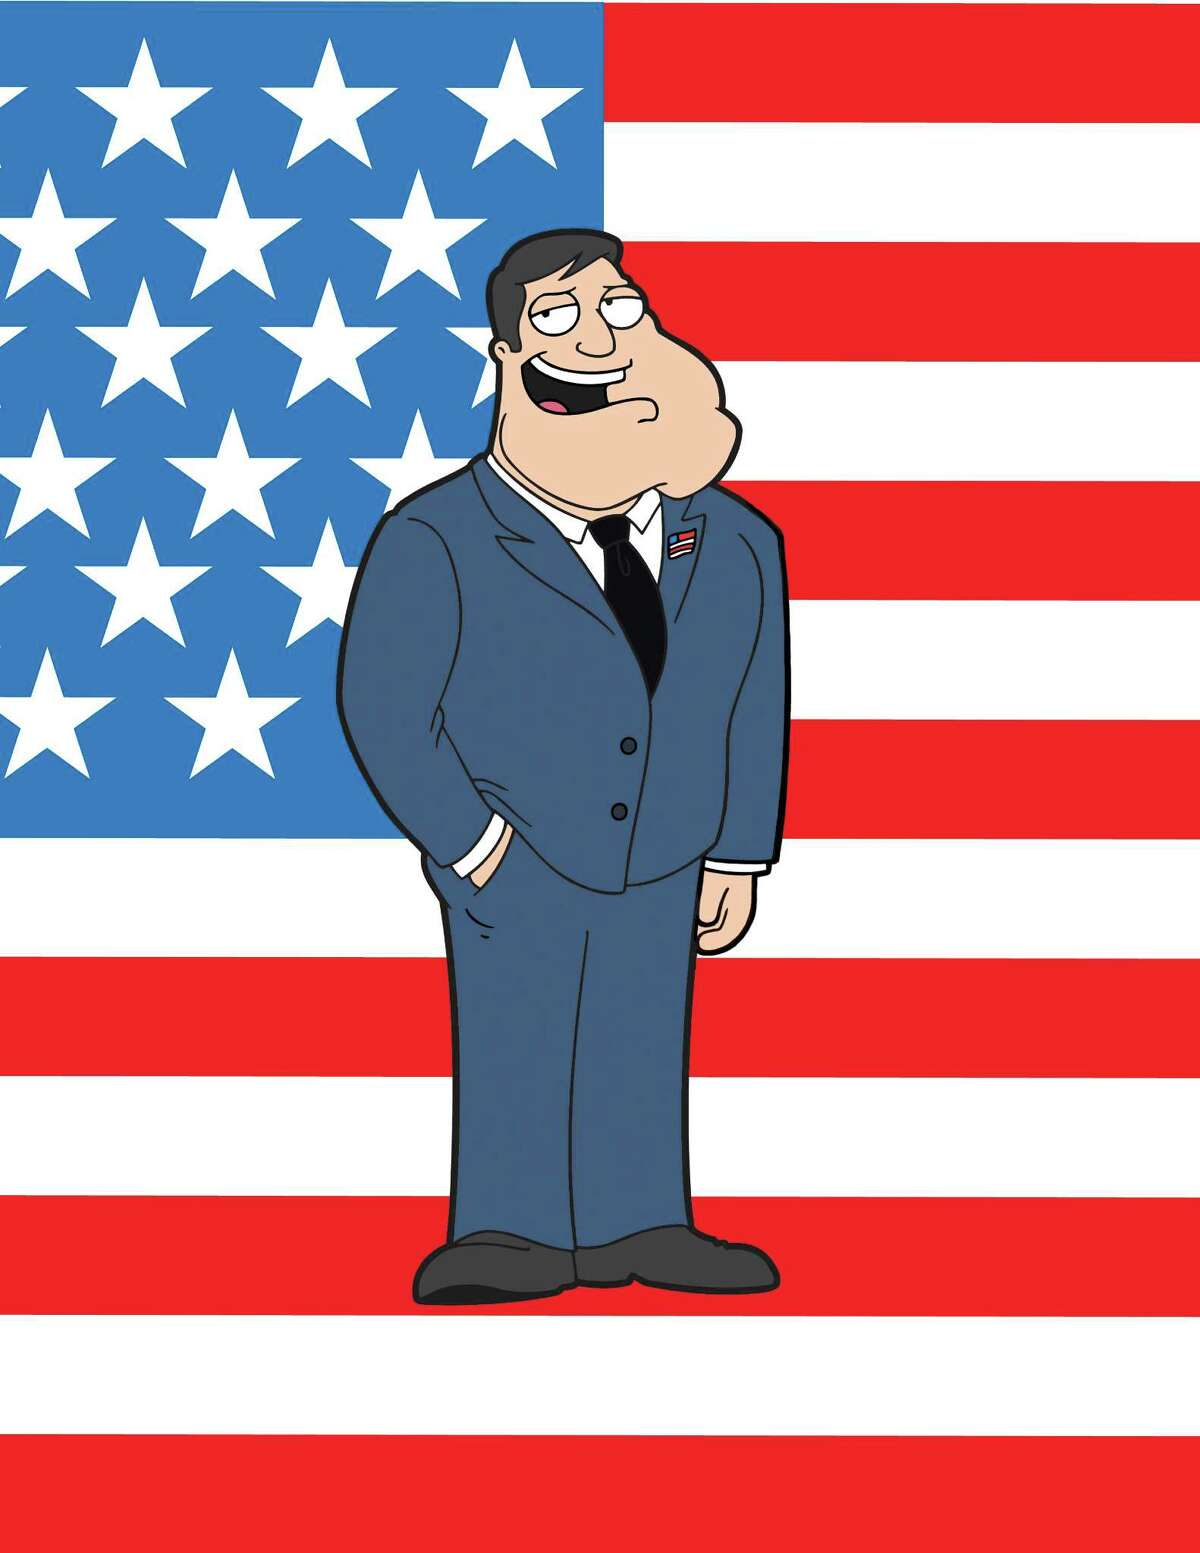 MacFarlane's second series, "American Dad!", debuted in 2005 on Fox as a companion to "Family Guy." It now airs on TBS.